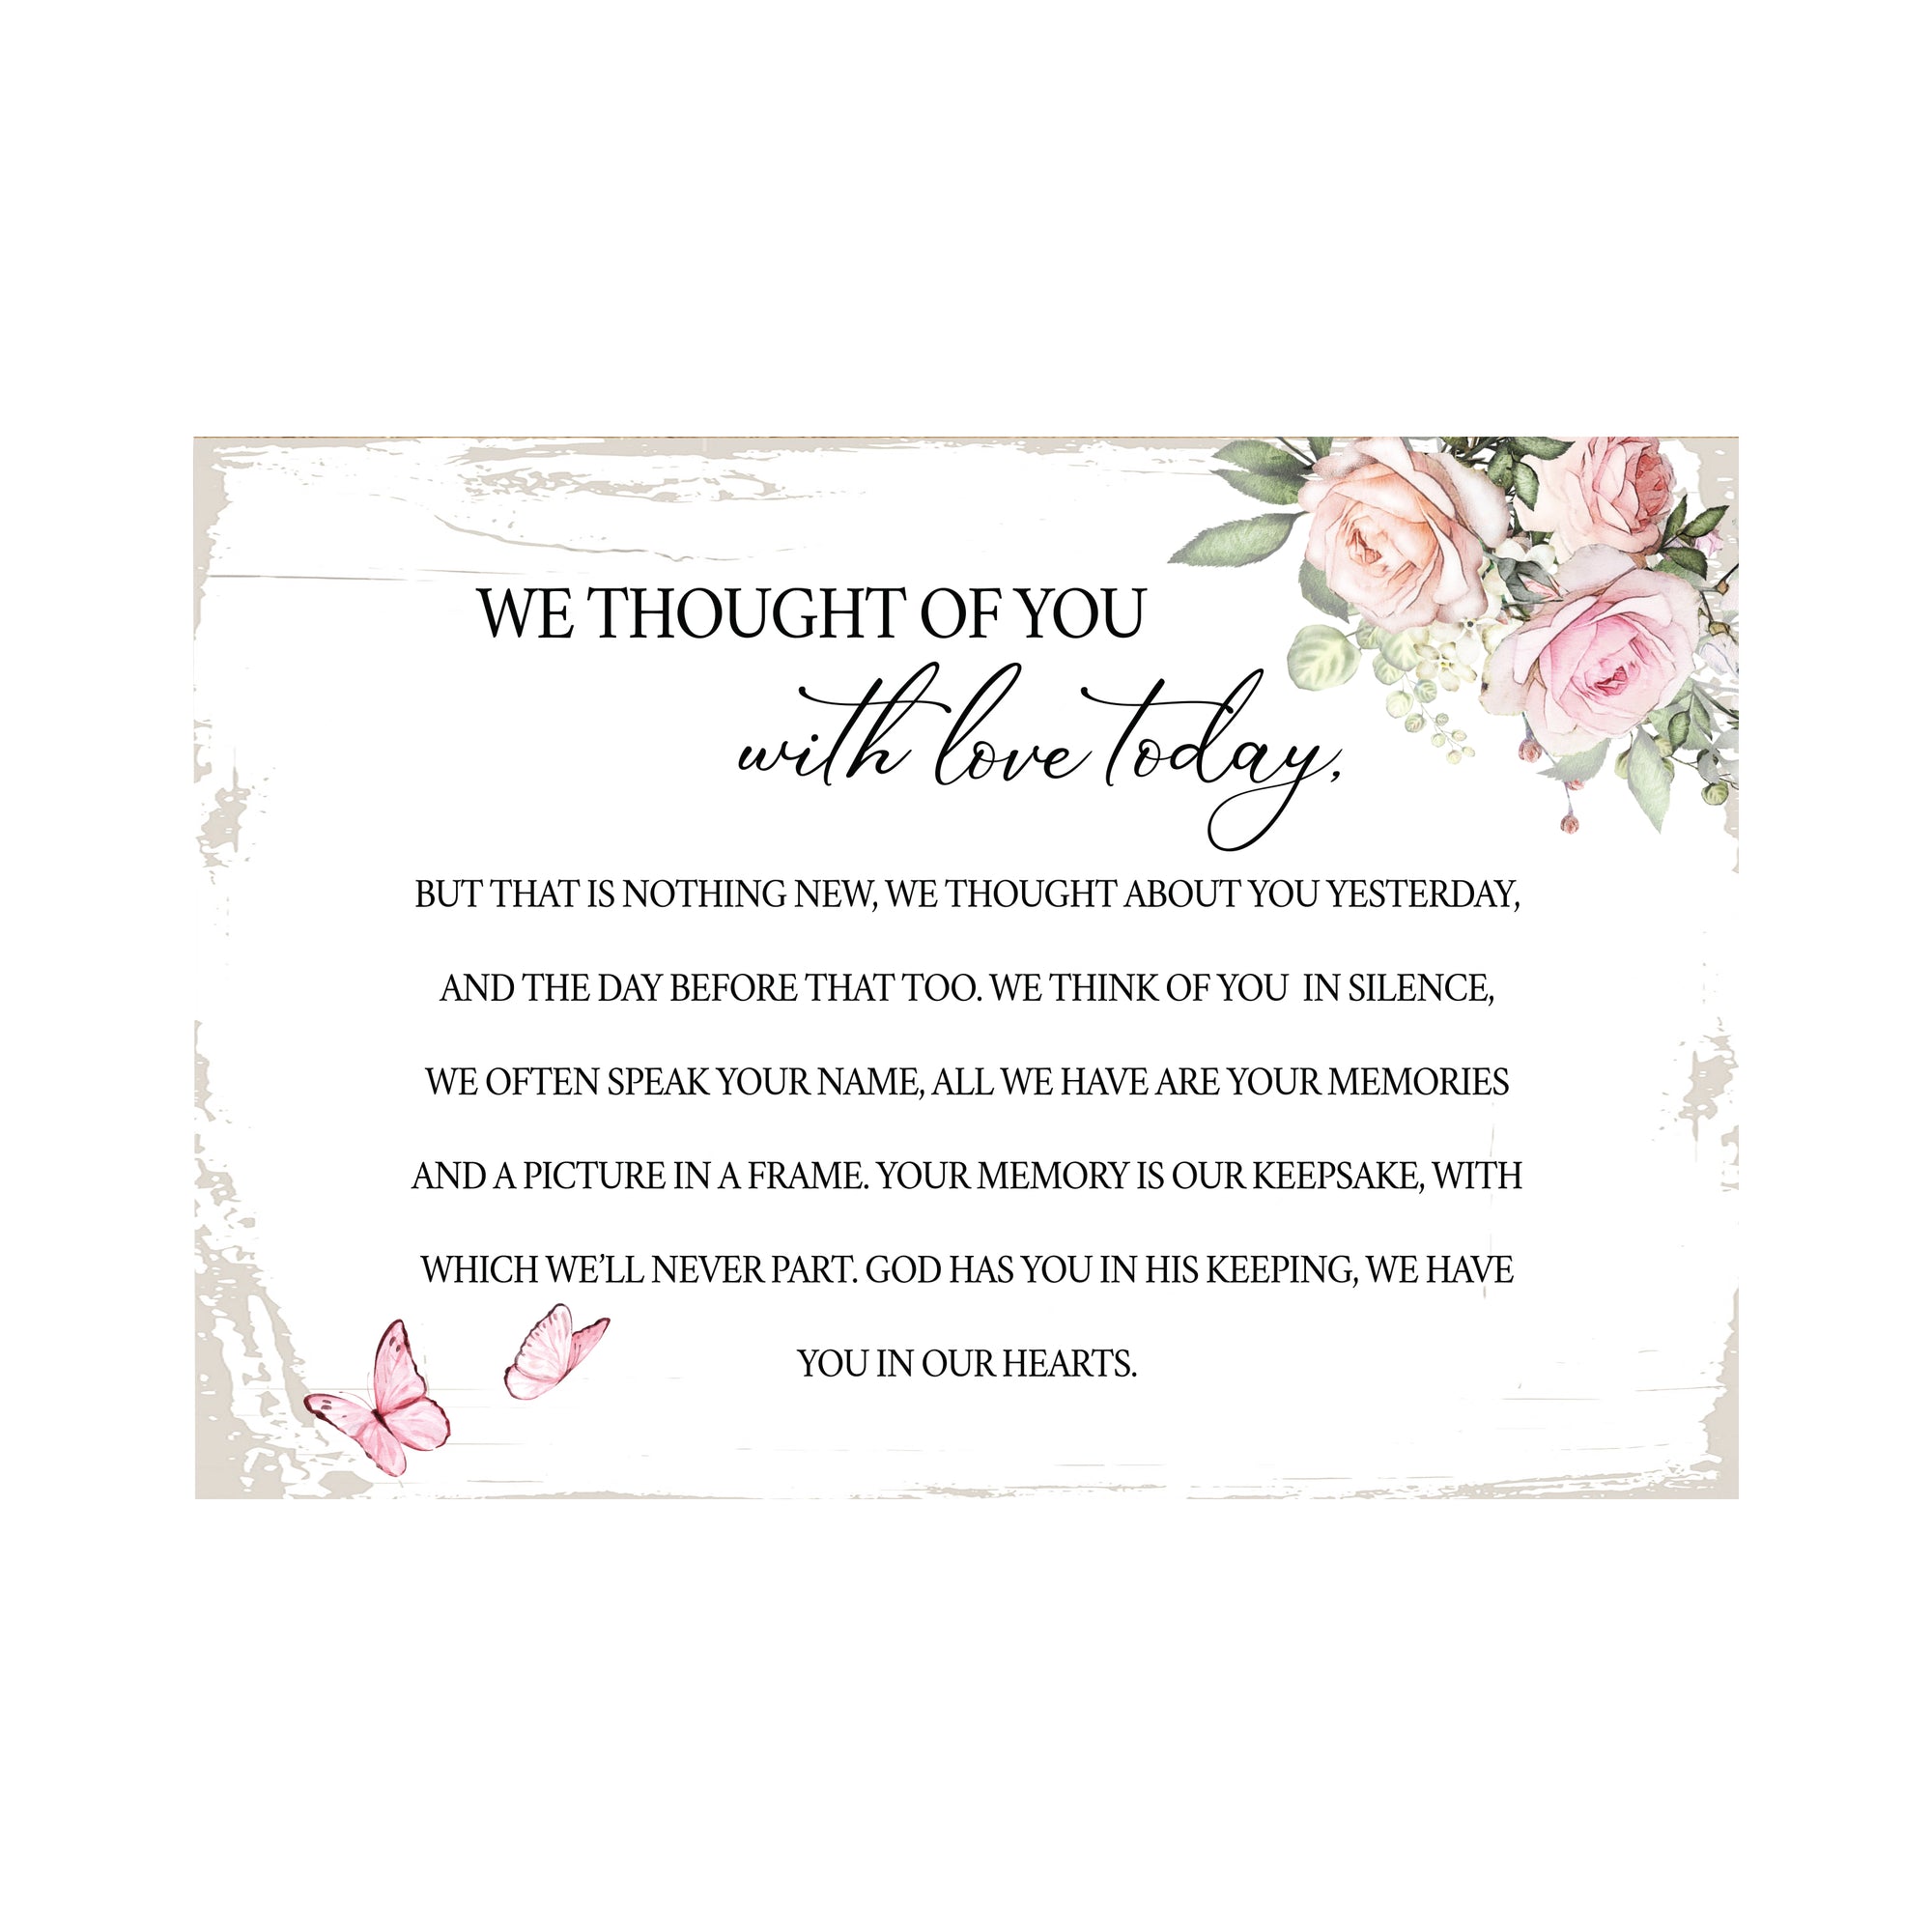 We Thought Of You Wooden Floral 5.5x8 Inches Memorial Art Sign Table Top and shelf decor For Home Décor